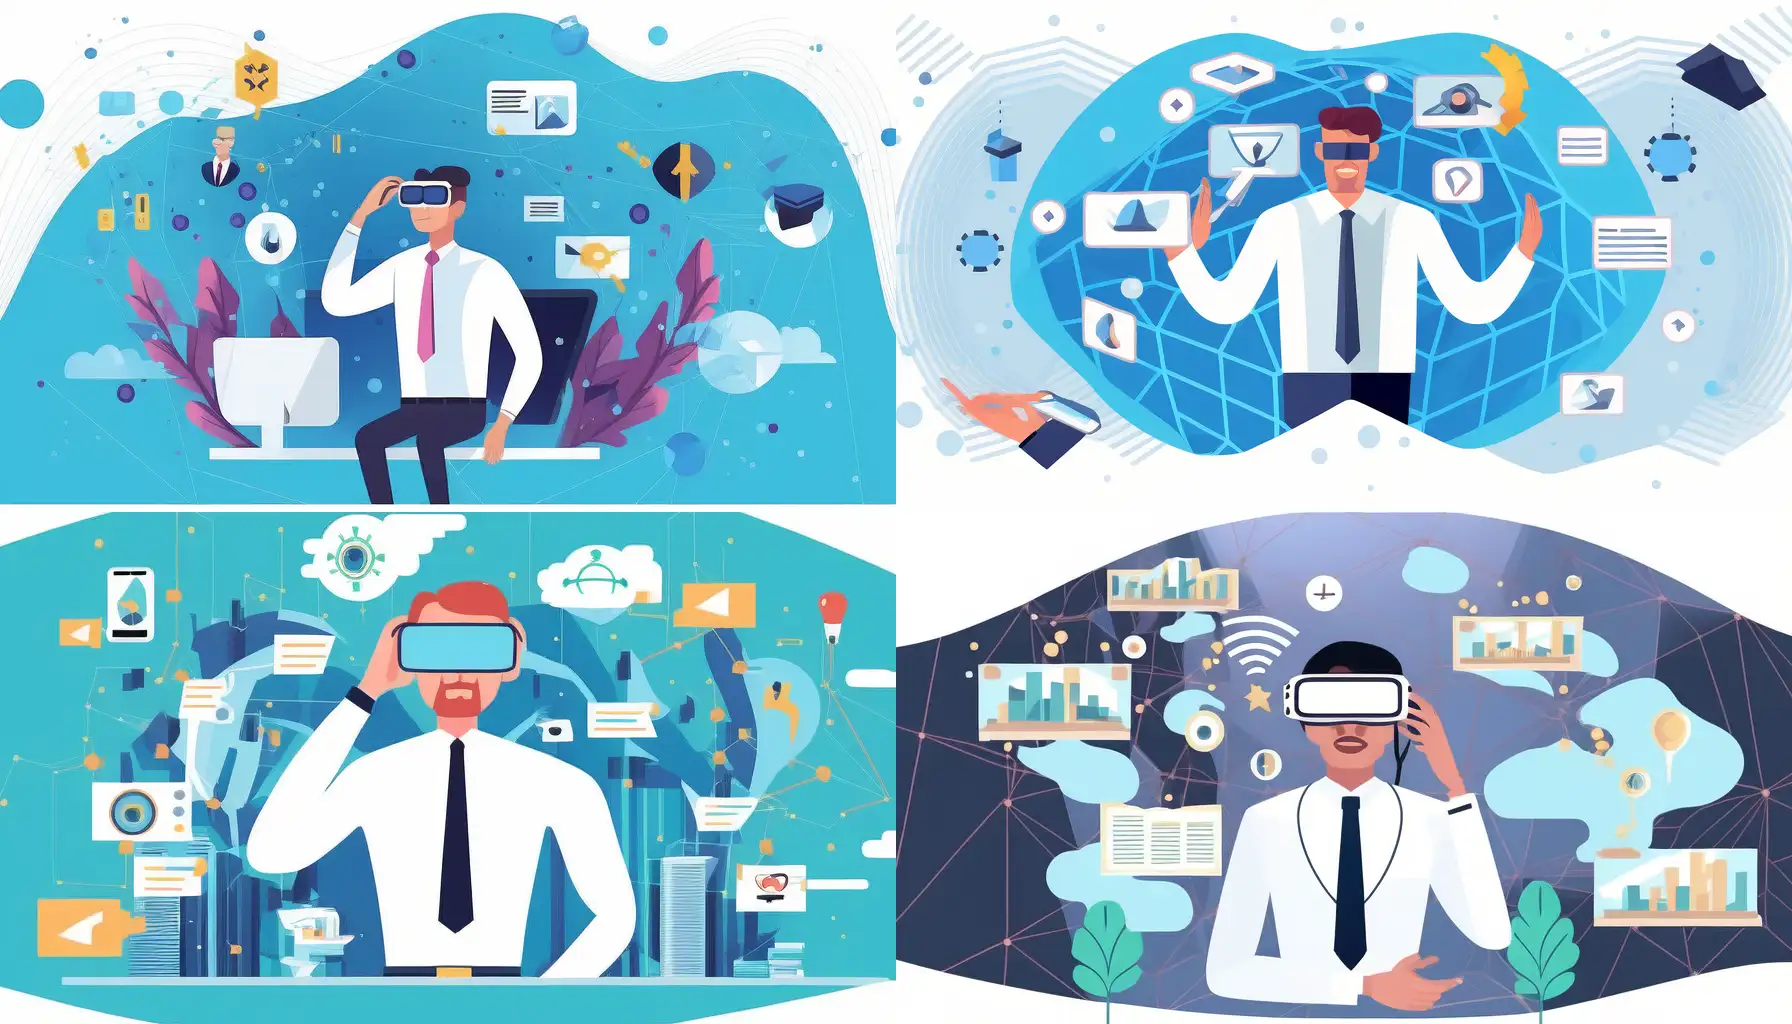 Design a flat-style illustration depicting a man in the financial sector, dressed in a crisp white shirt and tie, wearing VR glasses. He is immersed in a virtual environment, surrounded by floating digital data and icons representing financial information and analytics. The setting is sleek and modern, with clean lines and a minimalist aesthetic. The data elements should be stylized and geometric, suggesting a connection between technology and finance --ar 16:9